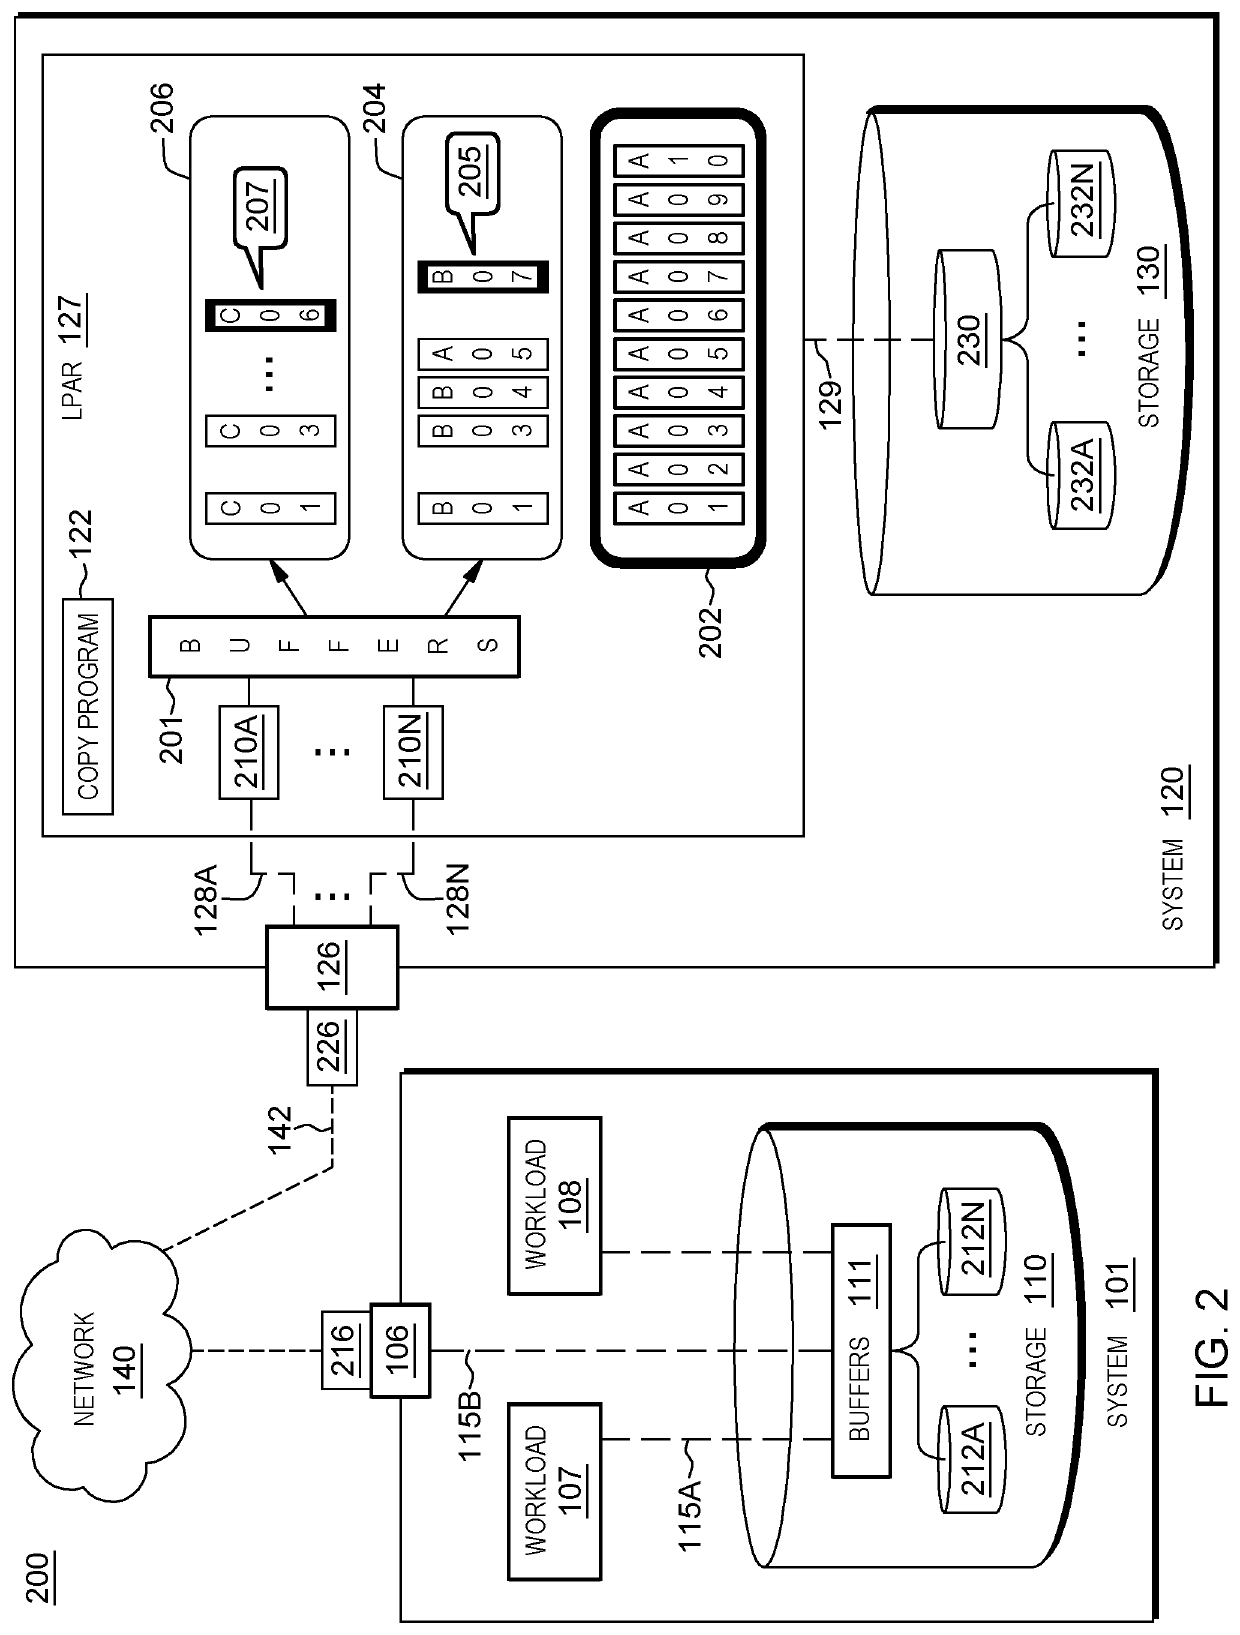 Modifying aspects of a storage system associated with data mirroring